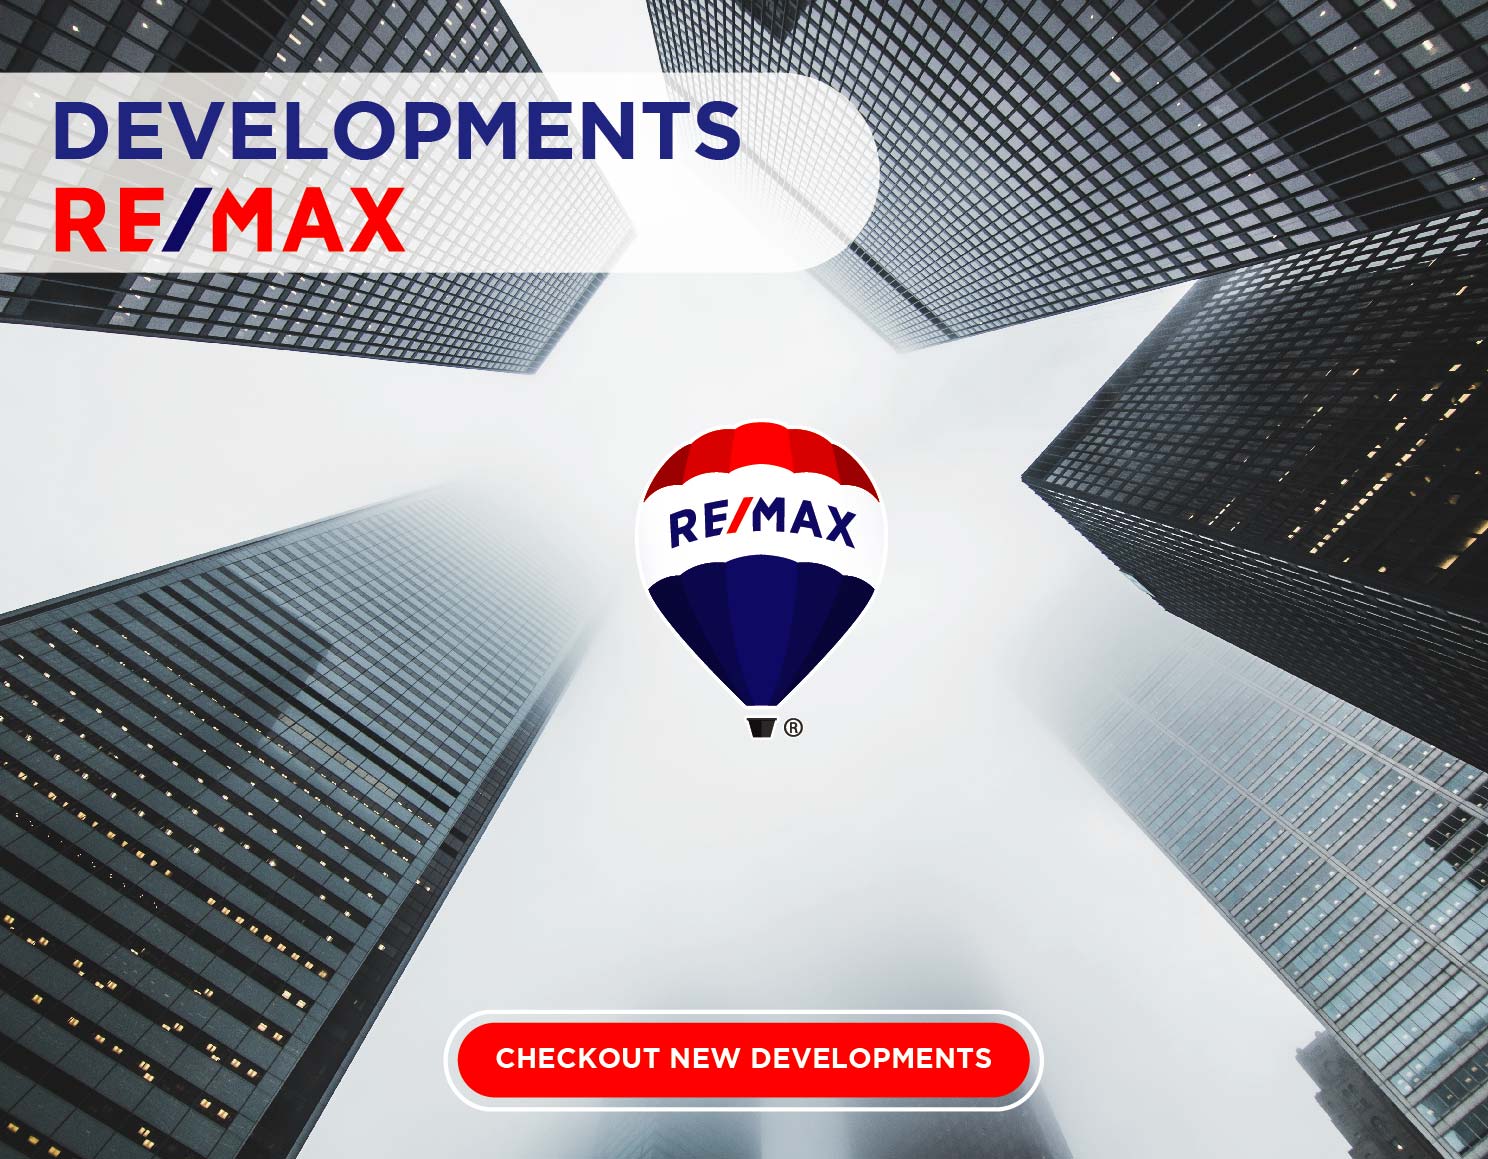 New property developments - residential and commercial properties